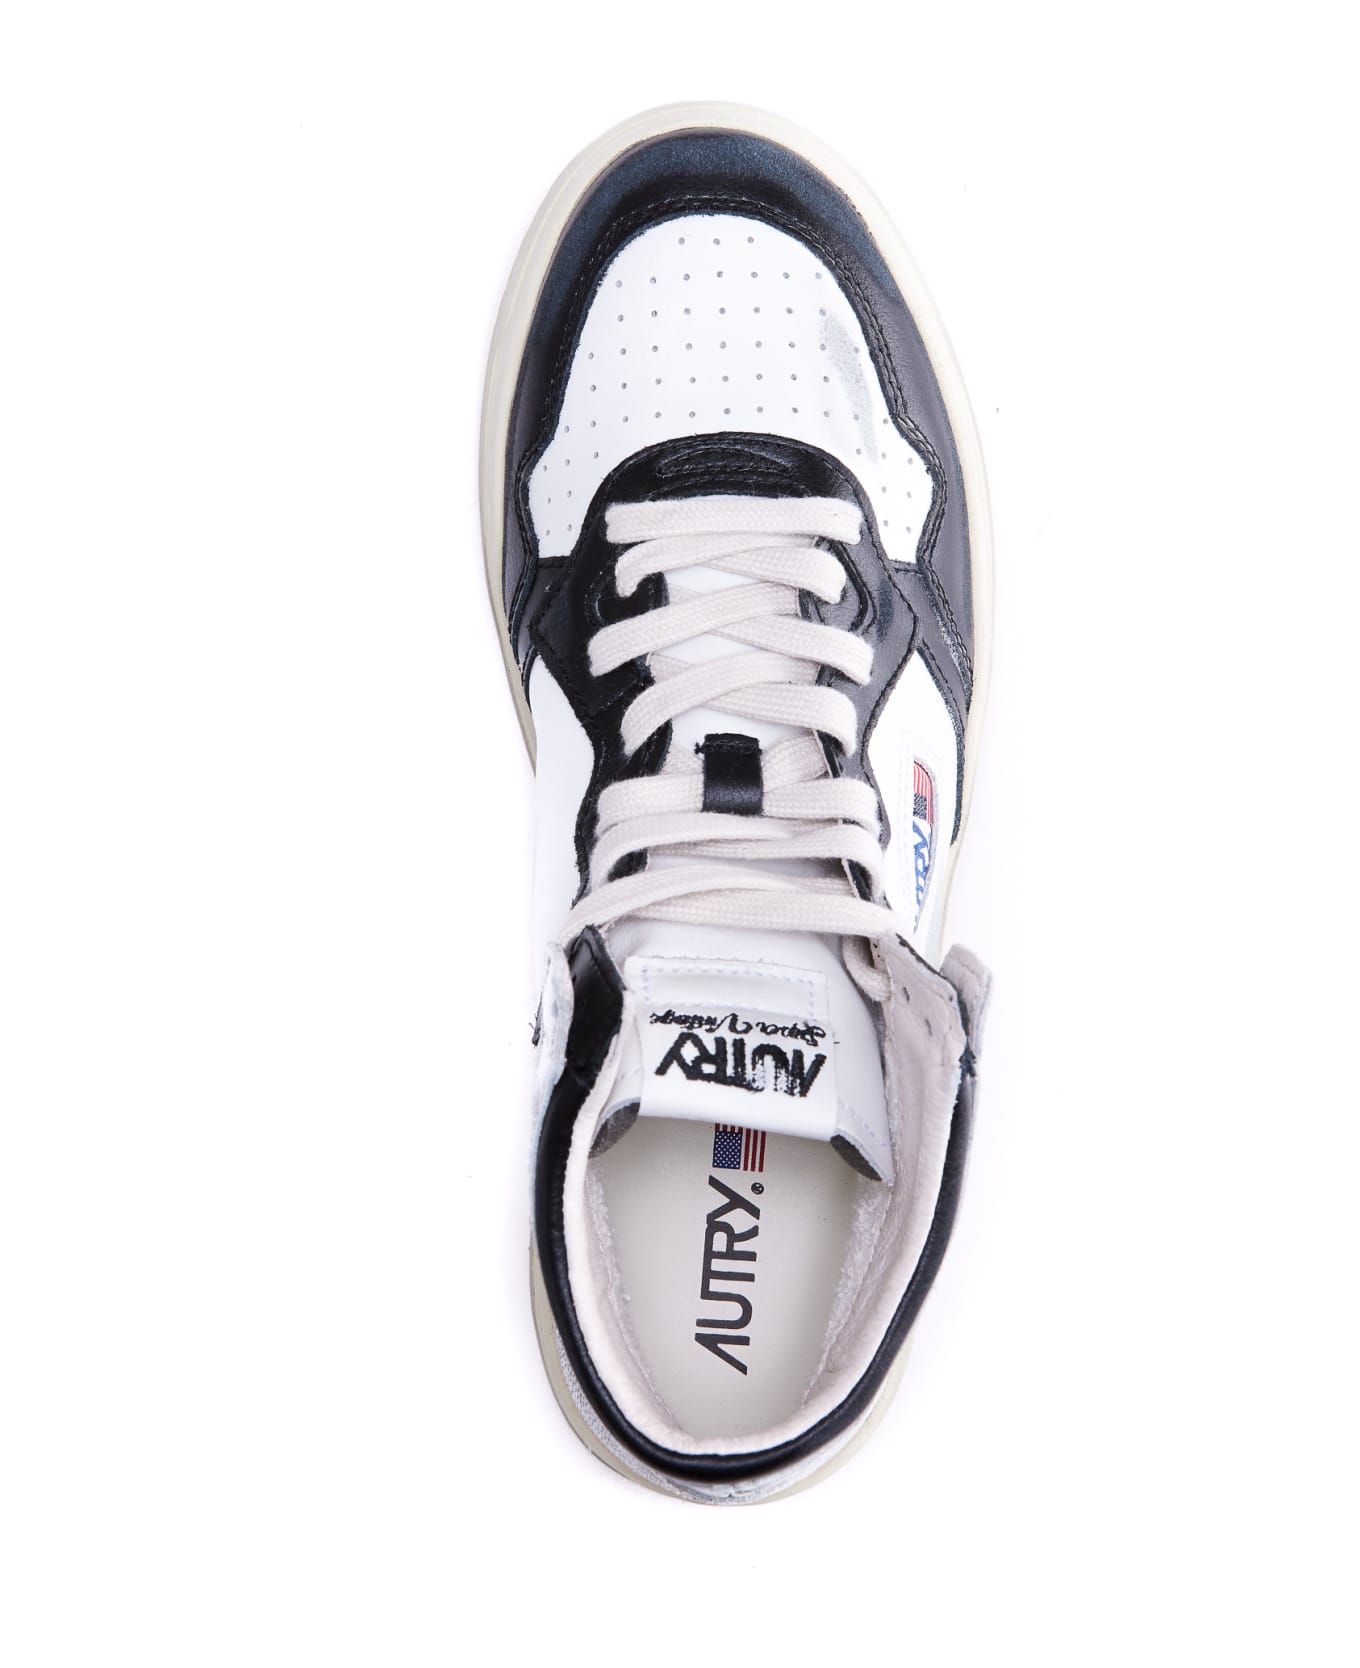 Autry Vintage Medalist Mid Sneakers - White, black, silver